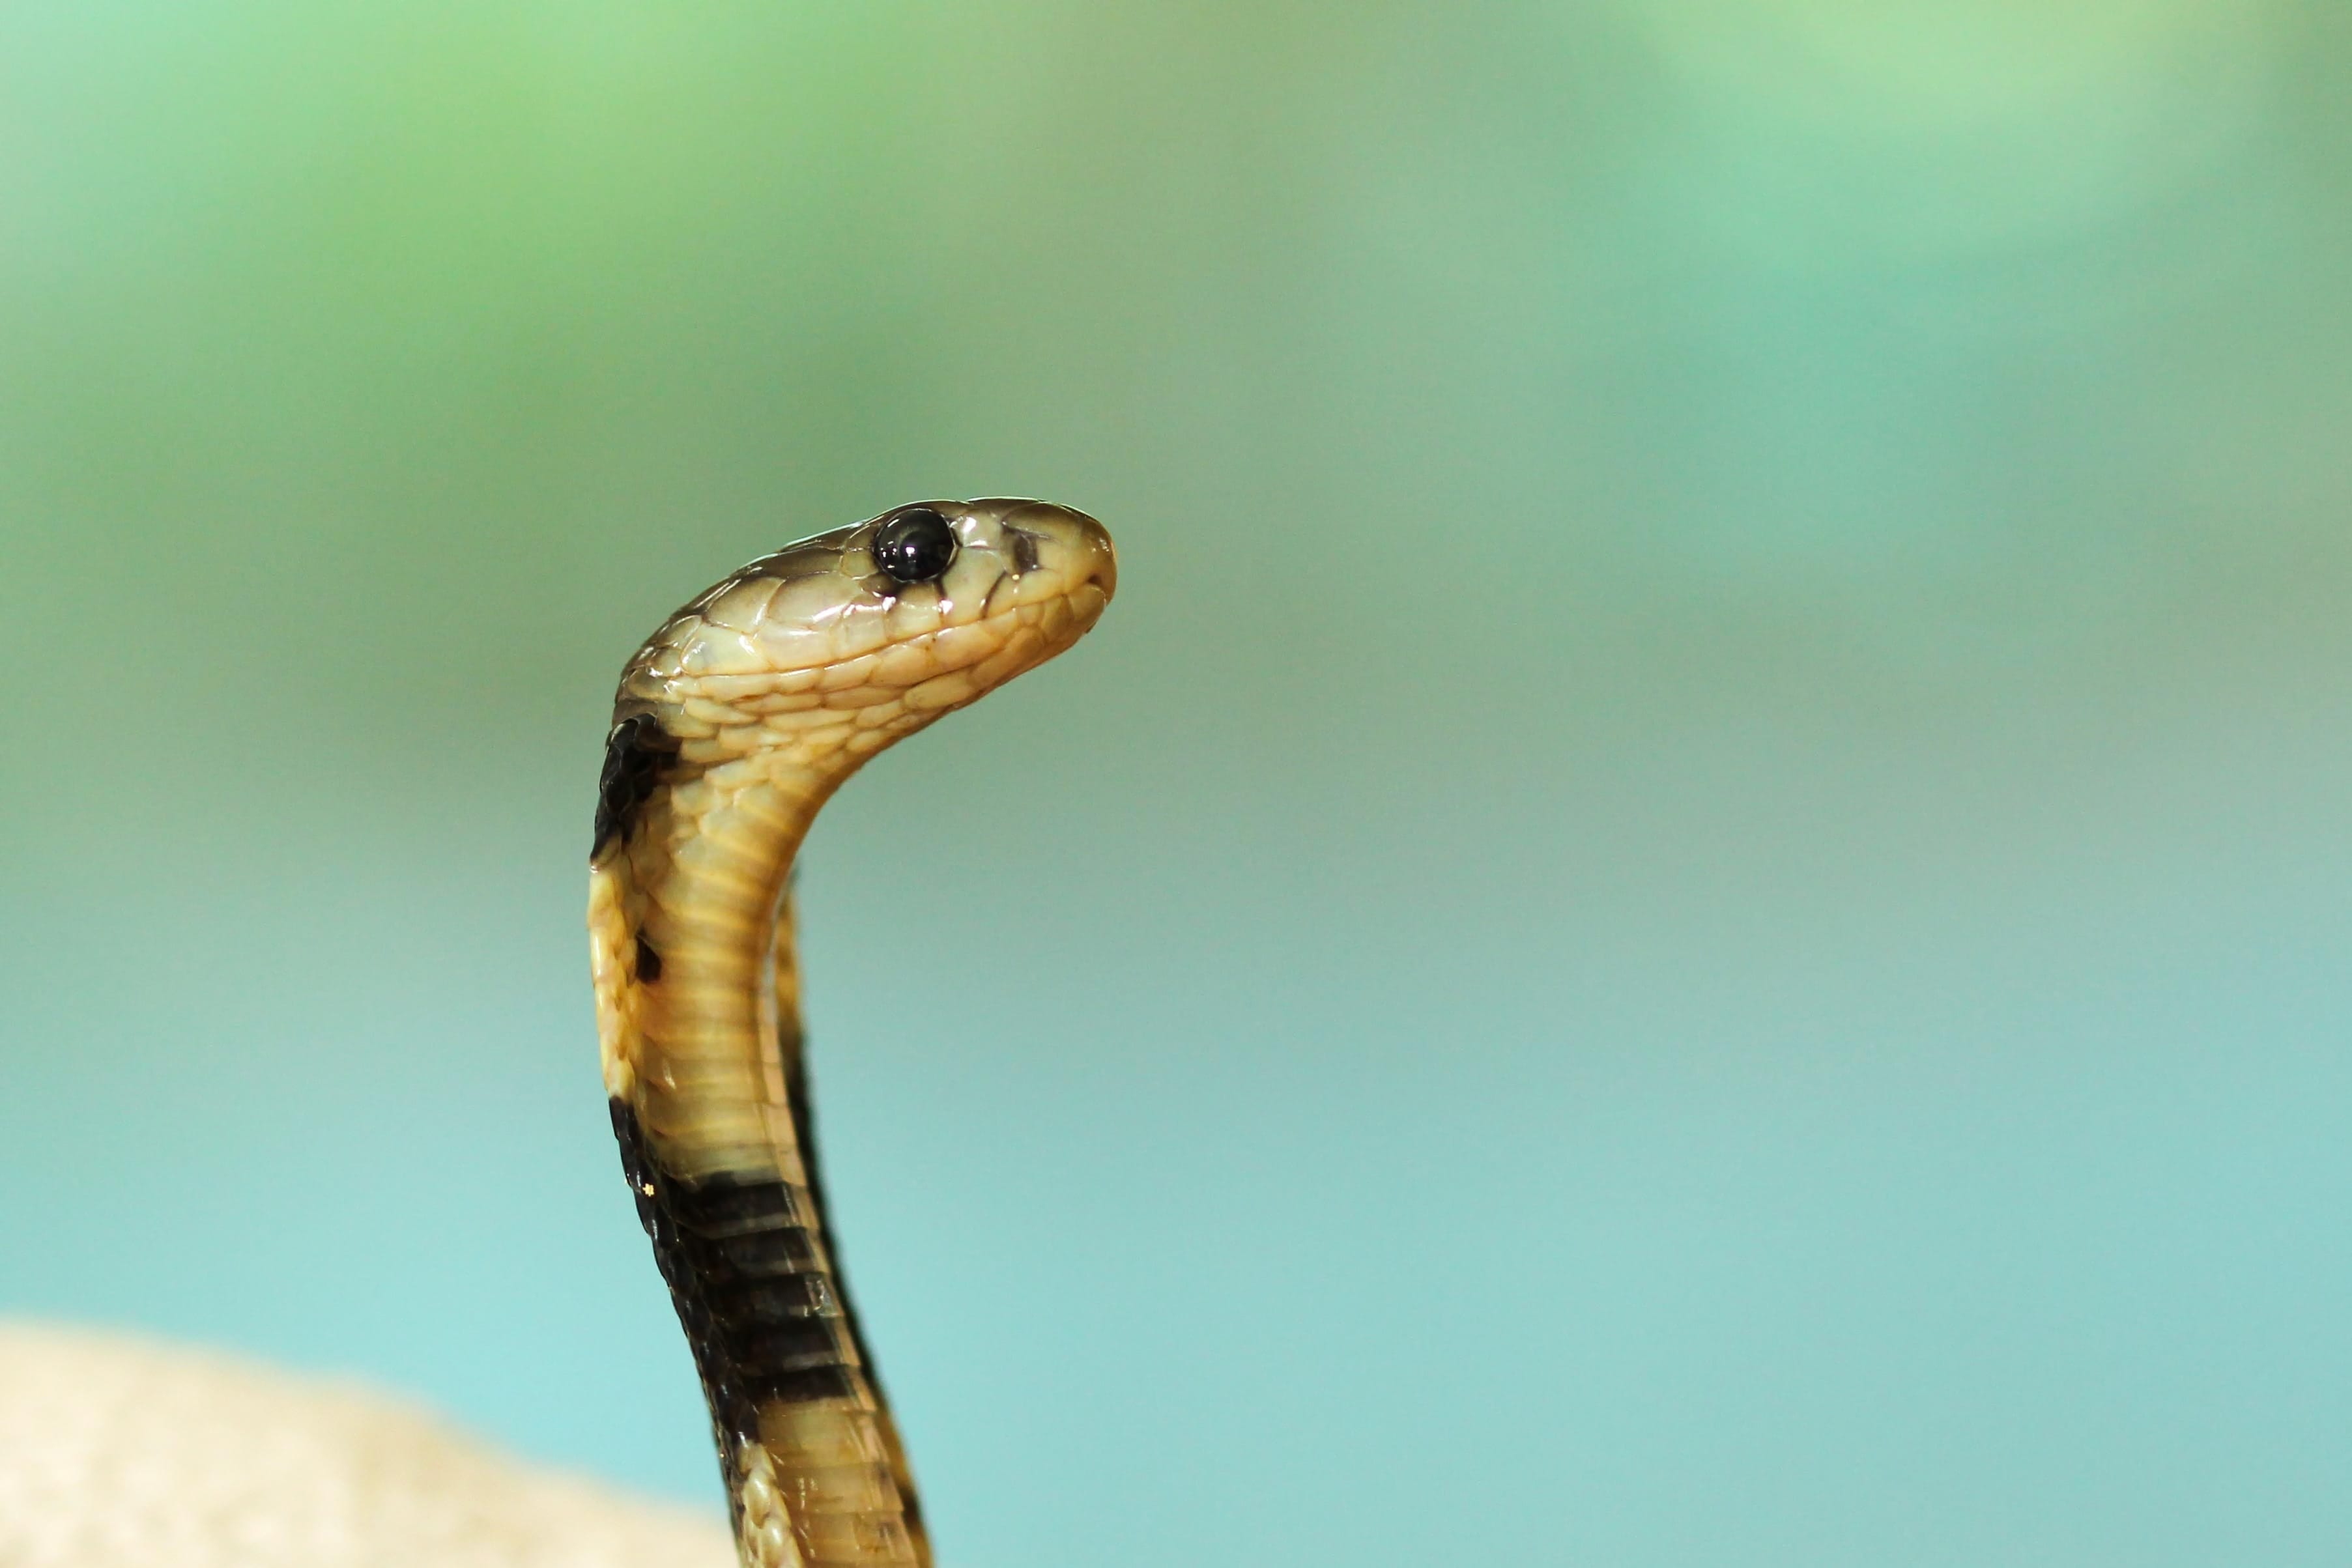 Scientists Map Genome for Snake Venom to Develop Treatment Options